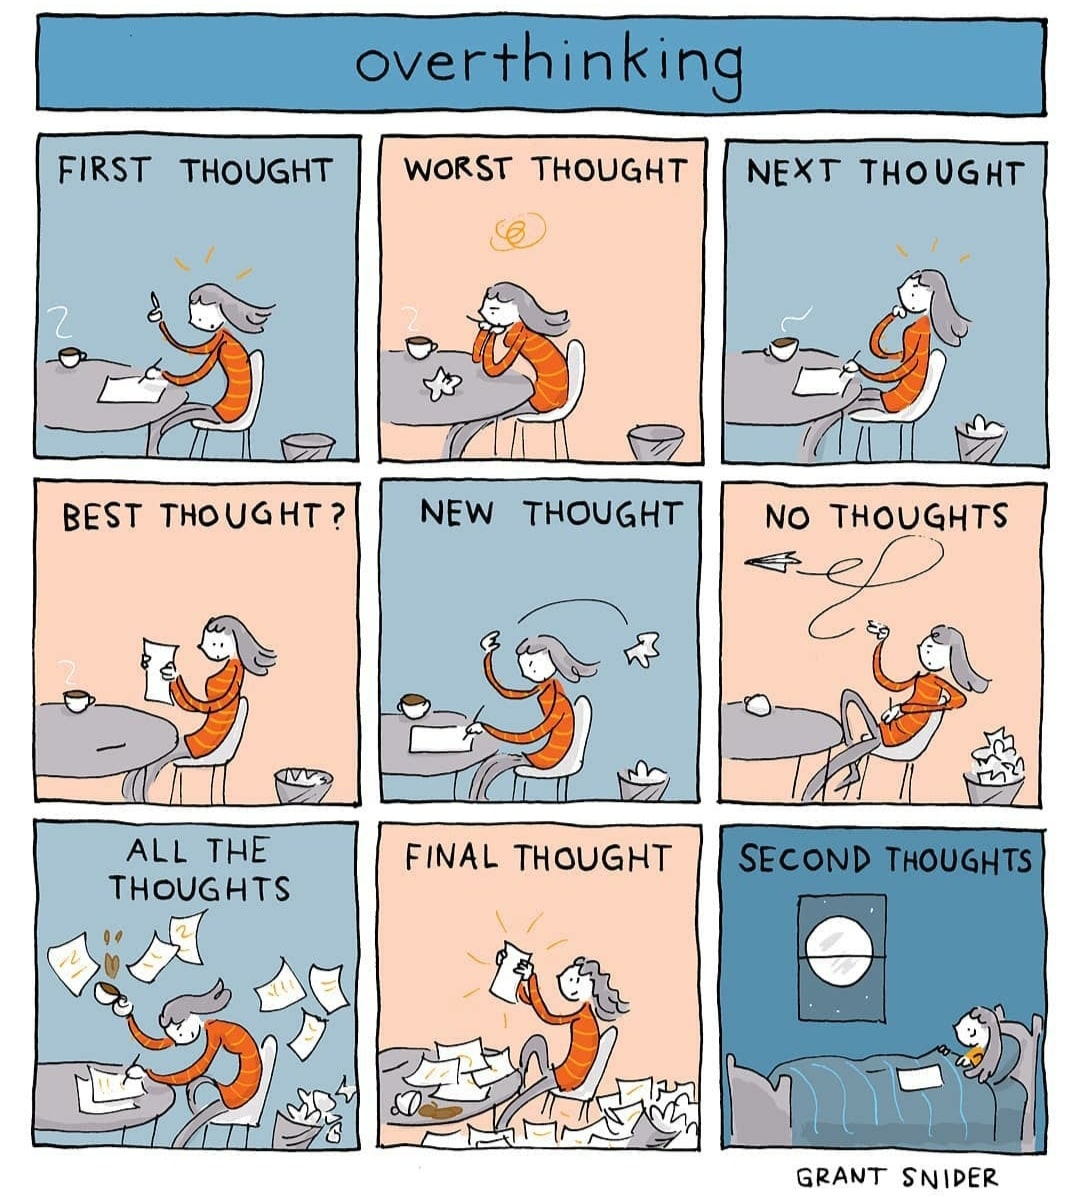 Overthinking [repost], Overthinking Comics Overthinking [repost], Overthinking text: over thinking FIRST THOUGHT BEST THOUGHT? ALL THE THOUGHTS WORST THOUGHT NEW THOUGHT FINAL THOUGHT NEXT THOUGHT No THOUGHTS SECOND THOUGHTS GRANT SNIDER 